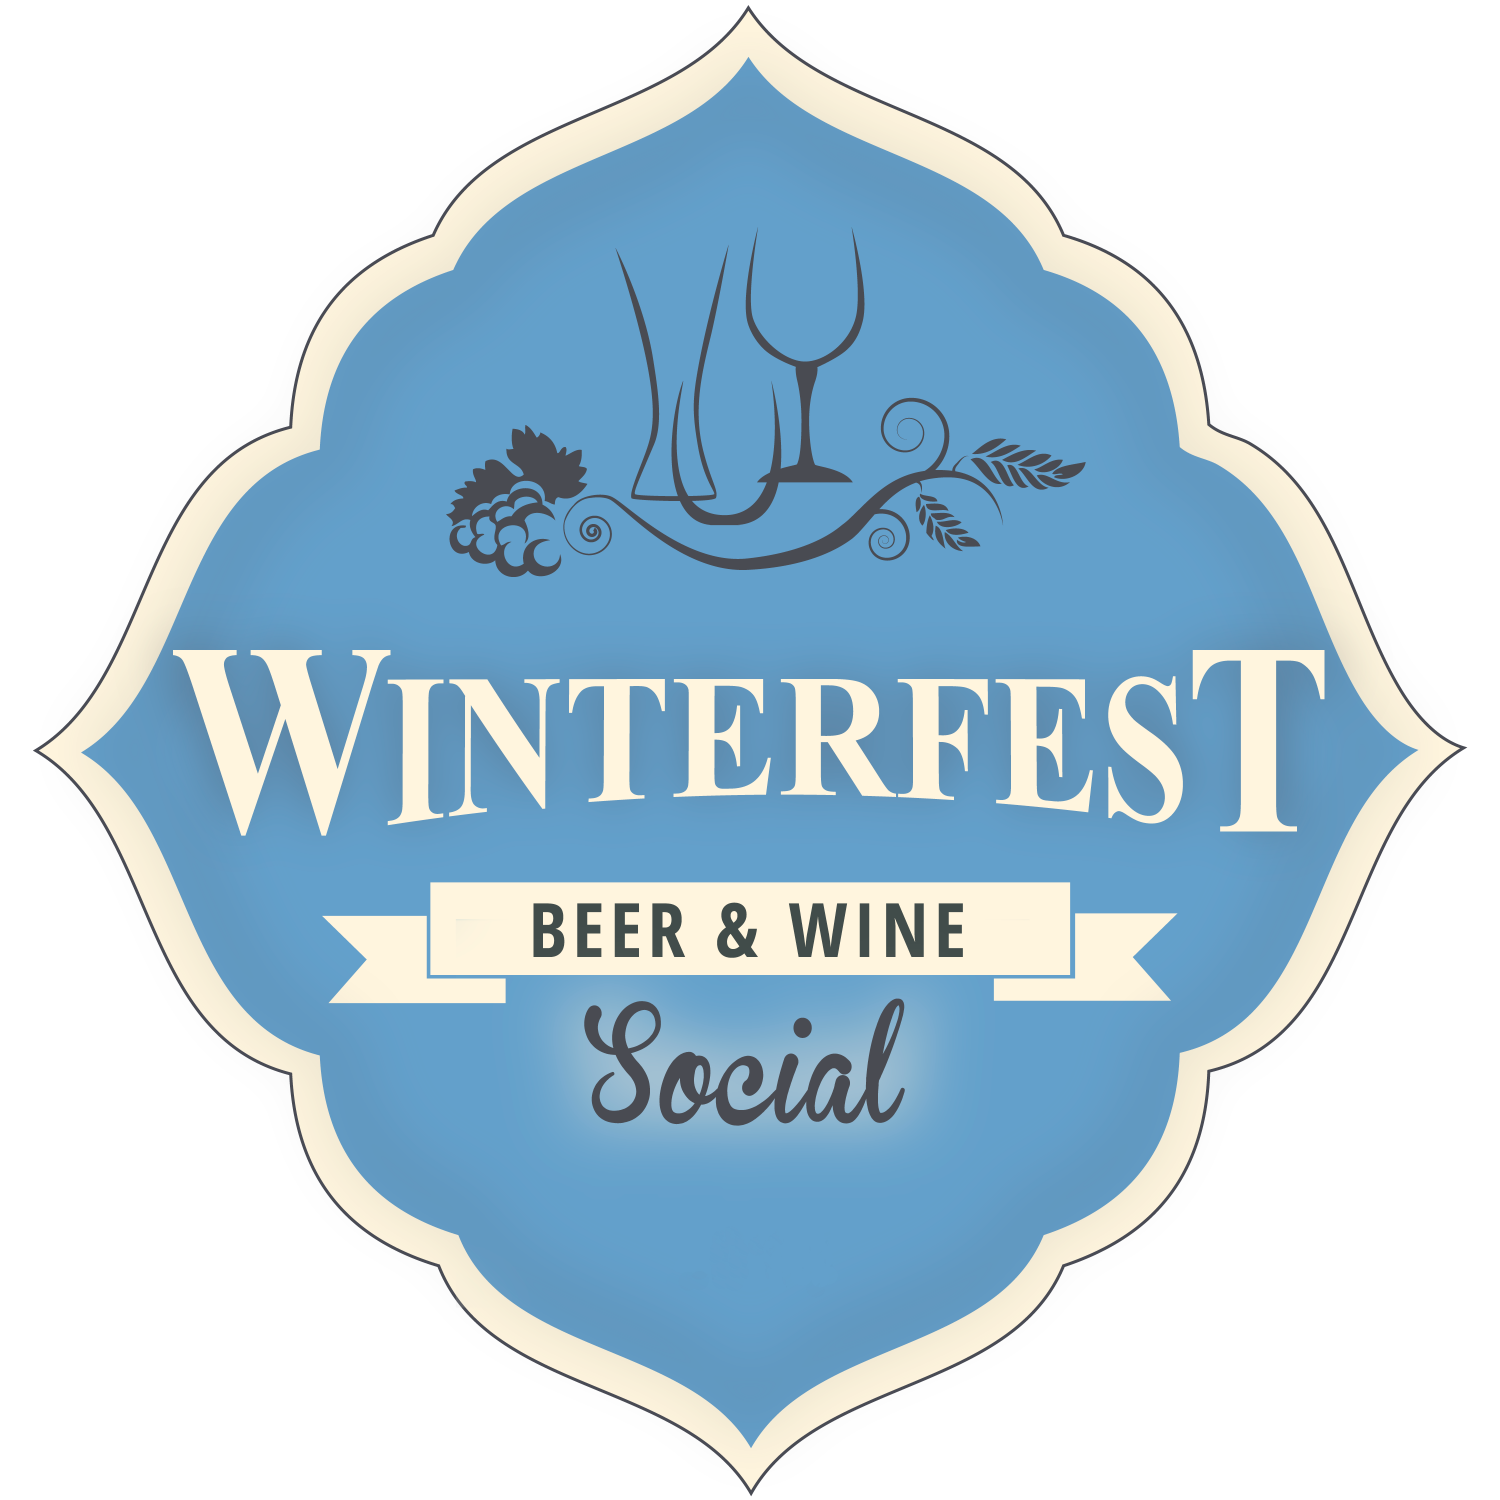 Beer, wine, and food event hoping to return in 2018!